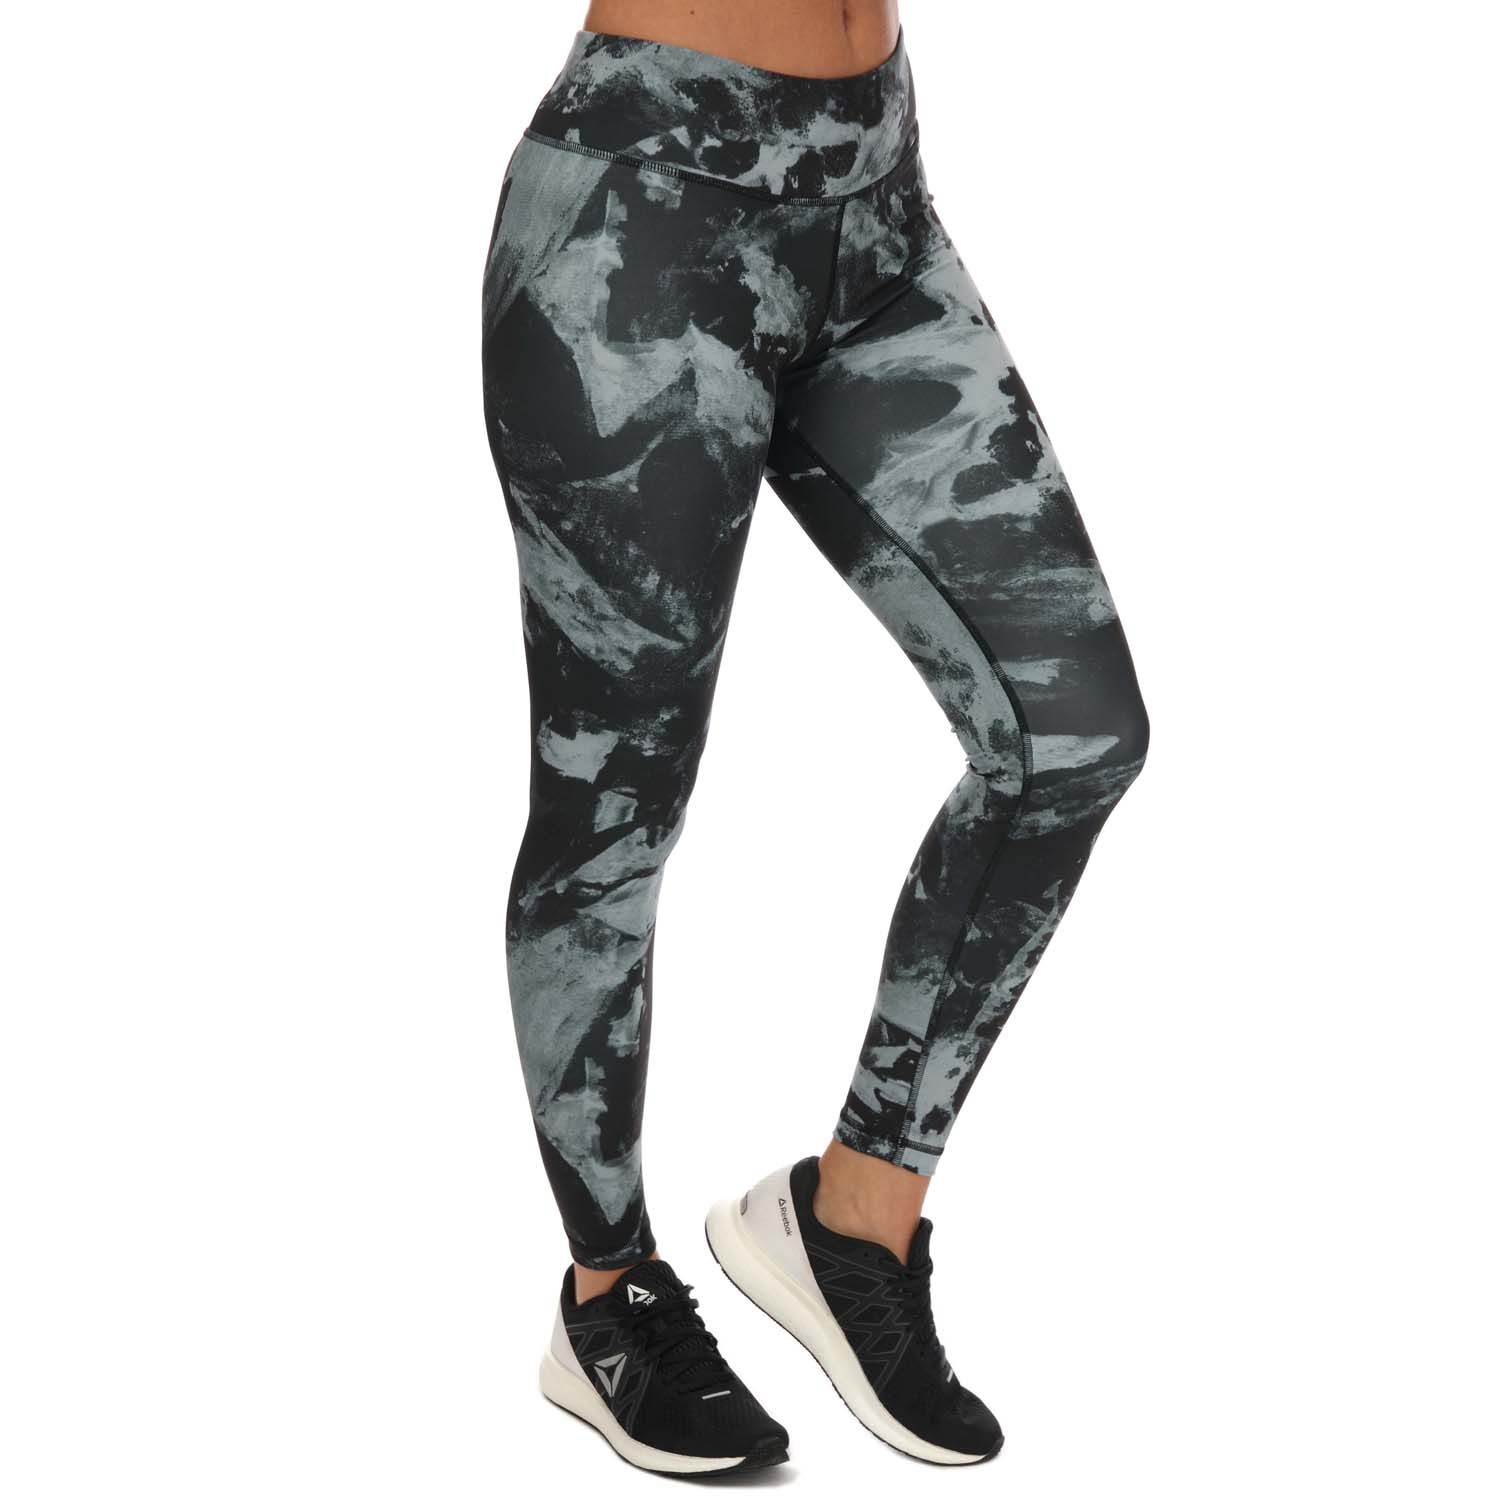 Reebok Women's MYT Allover Print Tights- Medium NEW WITH TAGS. 